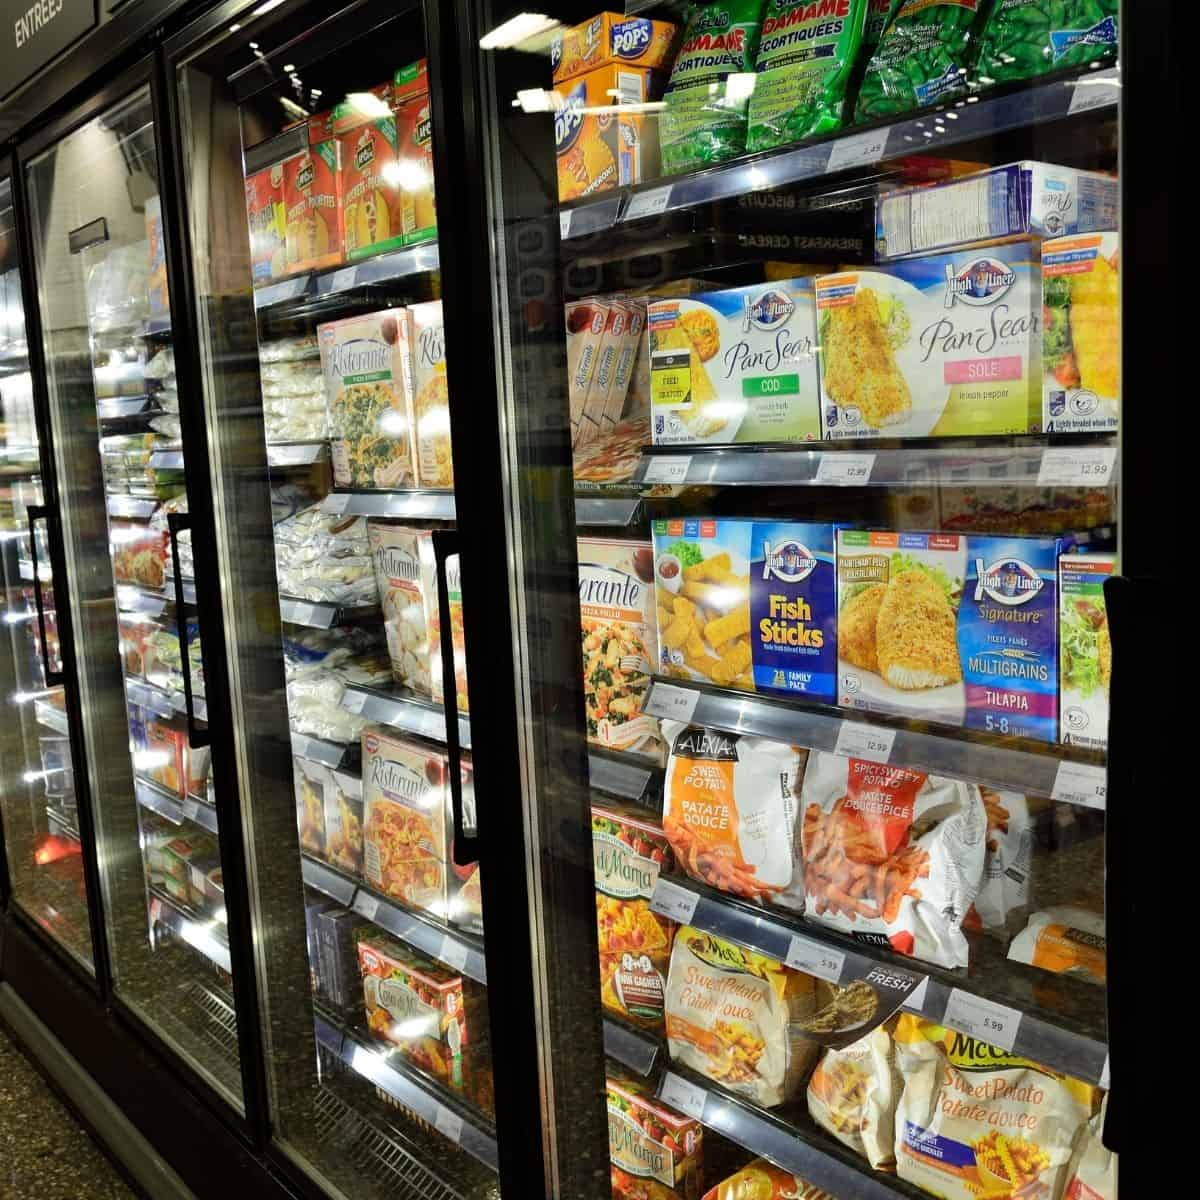 Frozen food section at grocery store